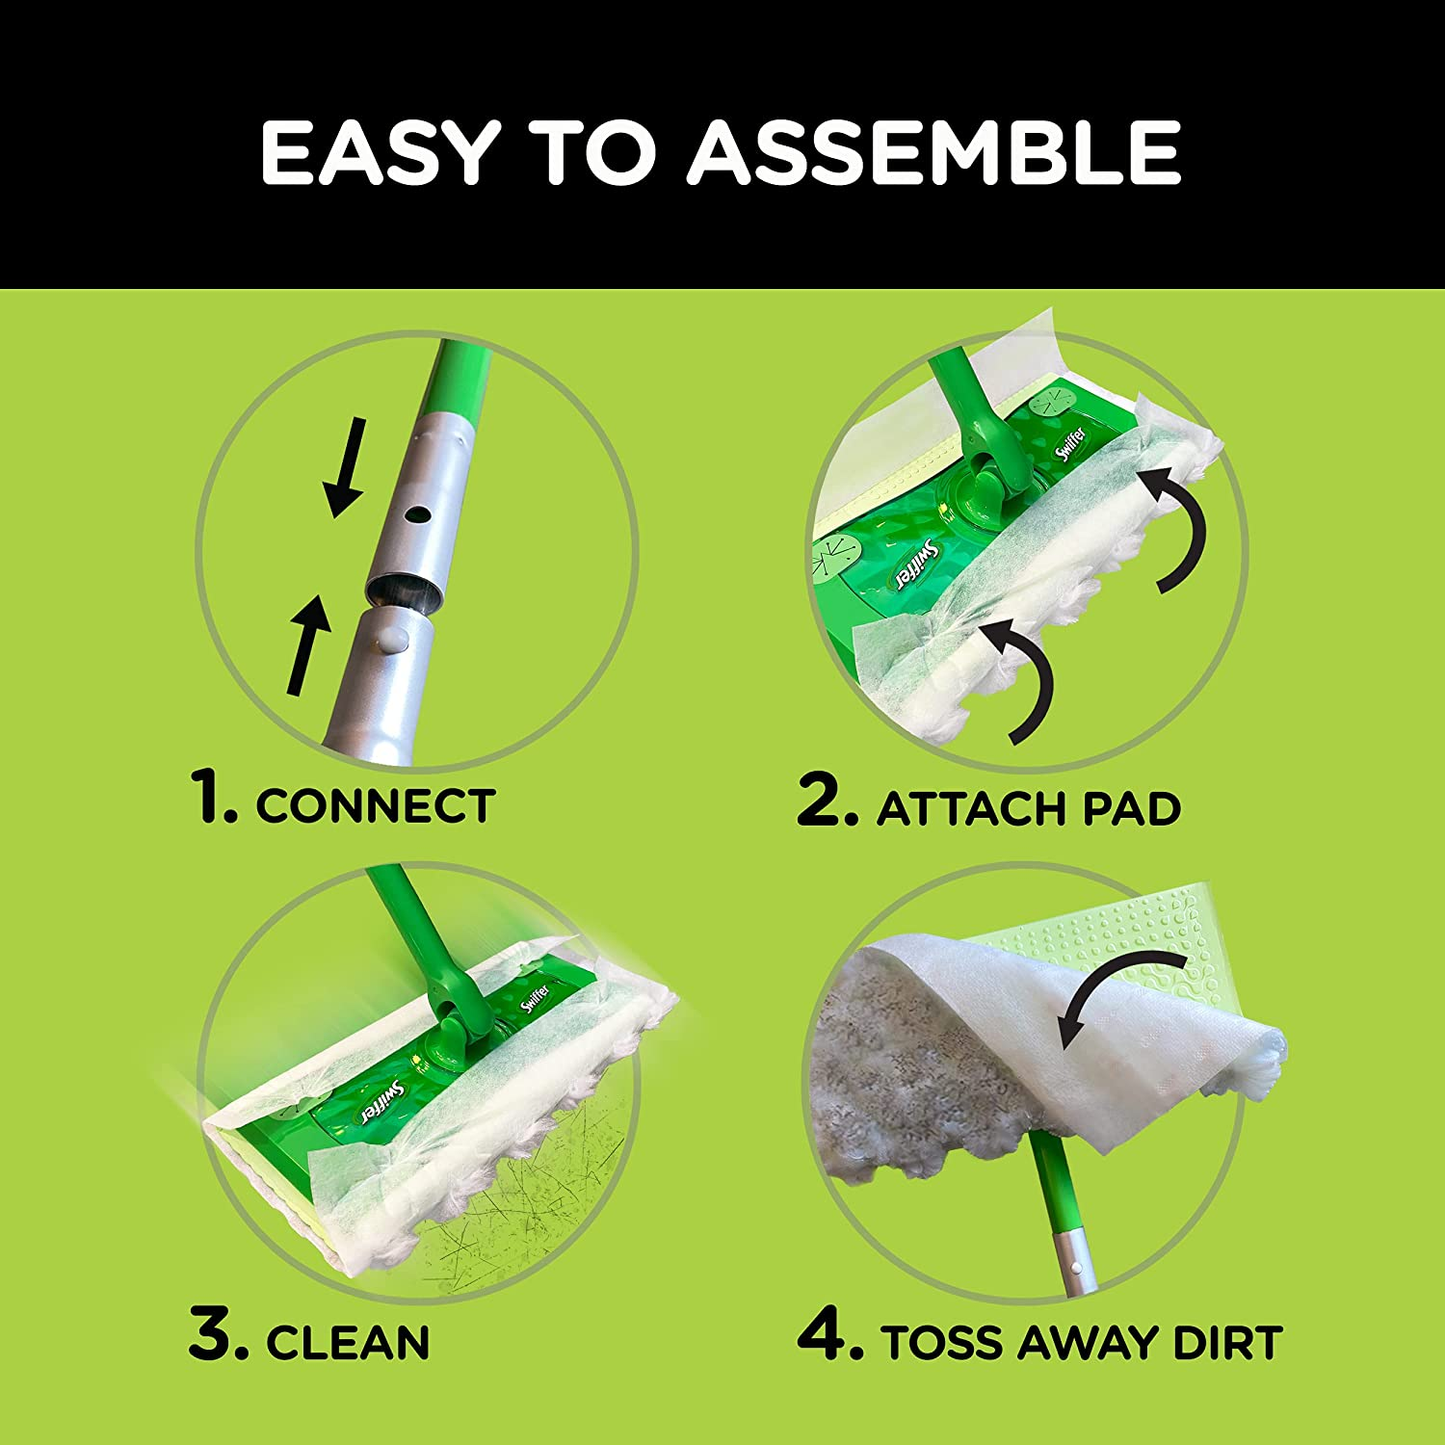 Sweeper 2-In-1 Mops for Floor Cleaning, Dry and Wet Multi Surface Floor Cleaner, Sweeping and Mopping Starter Kit, Includes 1 Mop + 19 Refills, 20 Piece Set